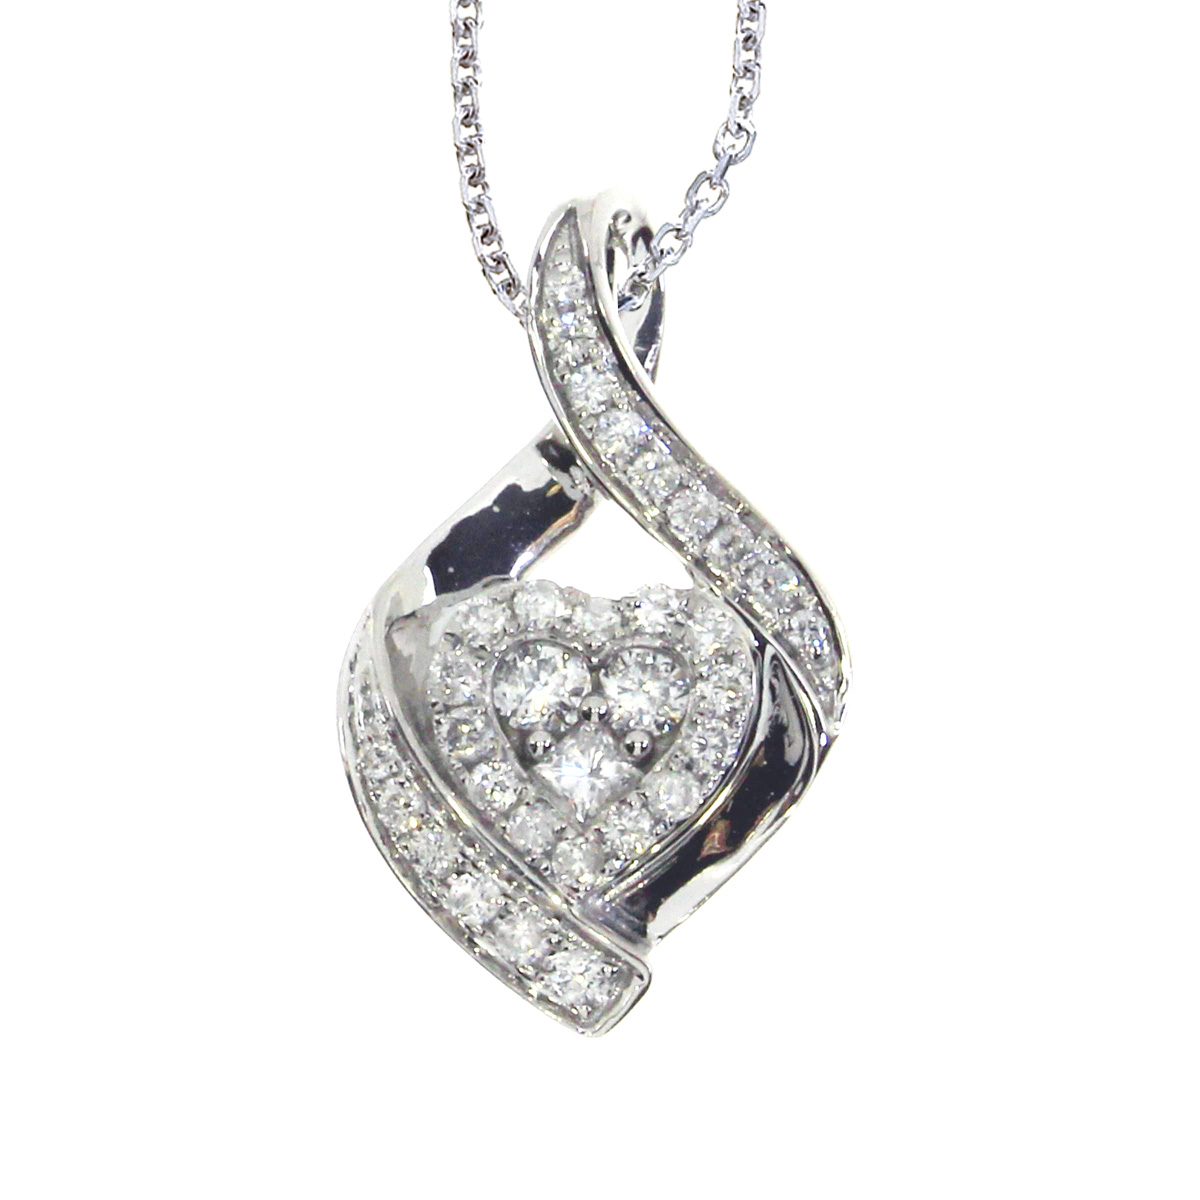 JCX3041: Beautiful shimmering 14k white gold heart shaped pendant covered in .37 carats of genuine bright diamonds.